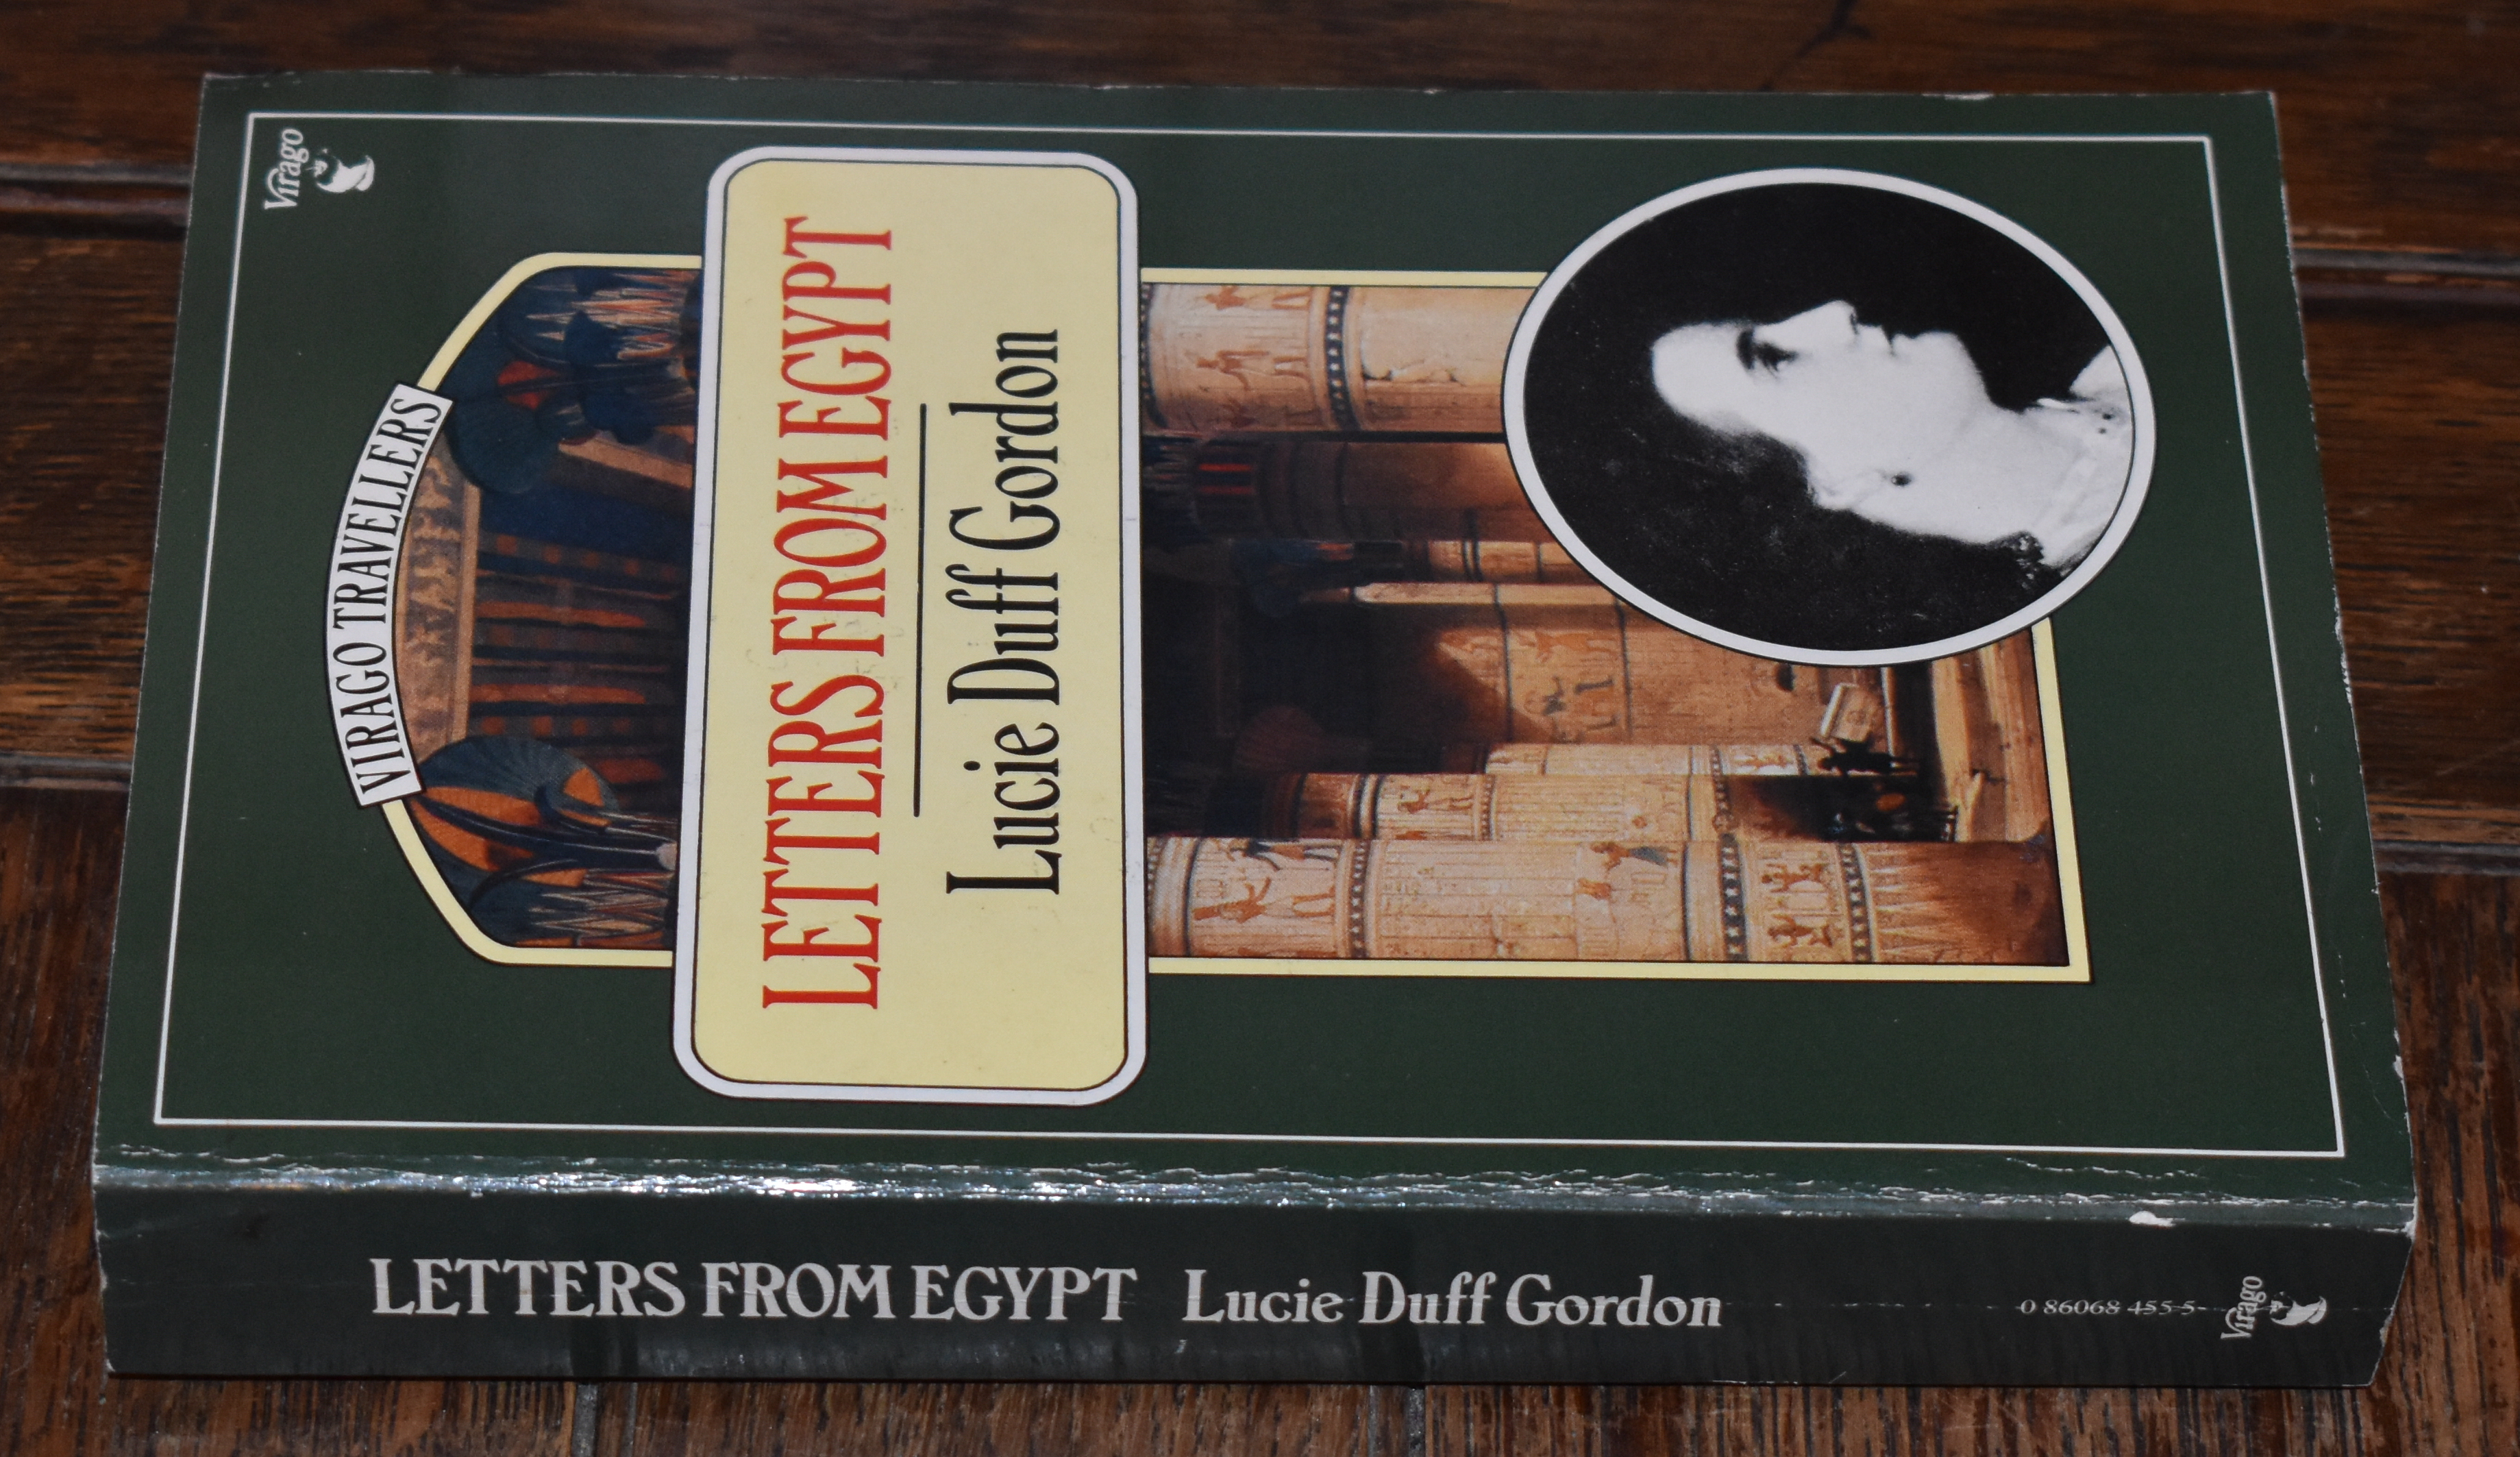 LETTERS FROM EGYPT - LUCIE DUFF GORDON